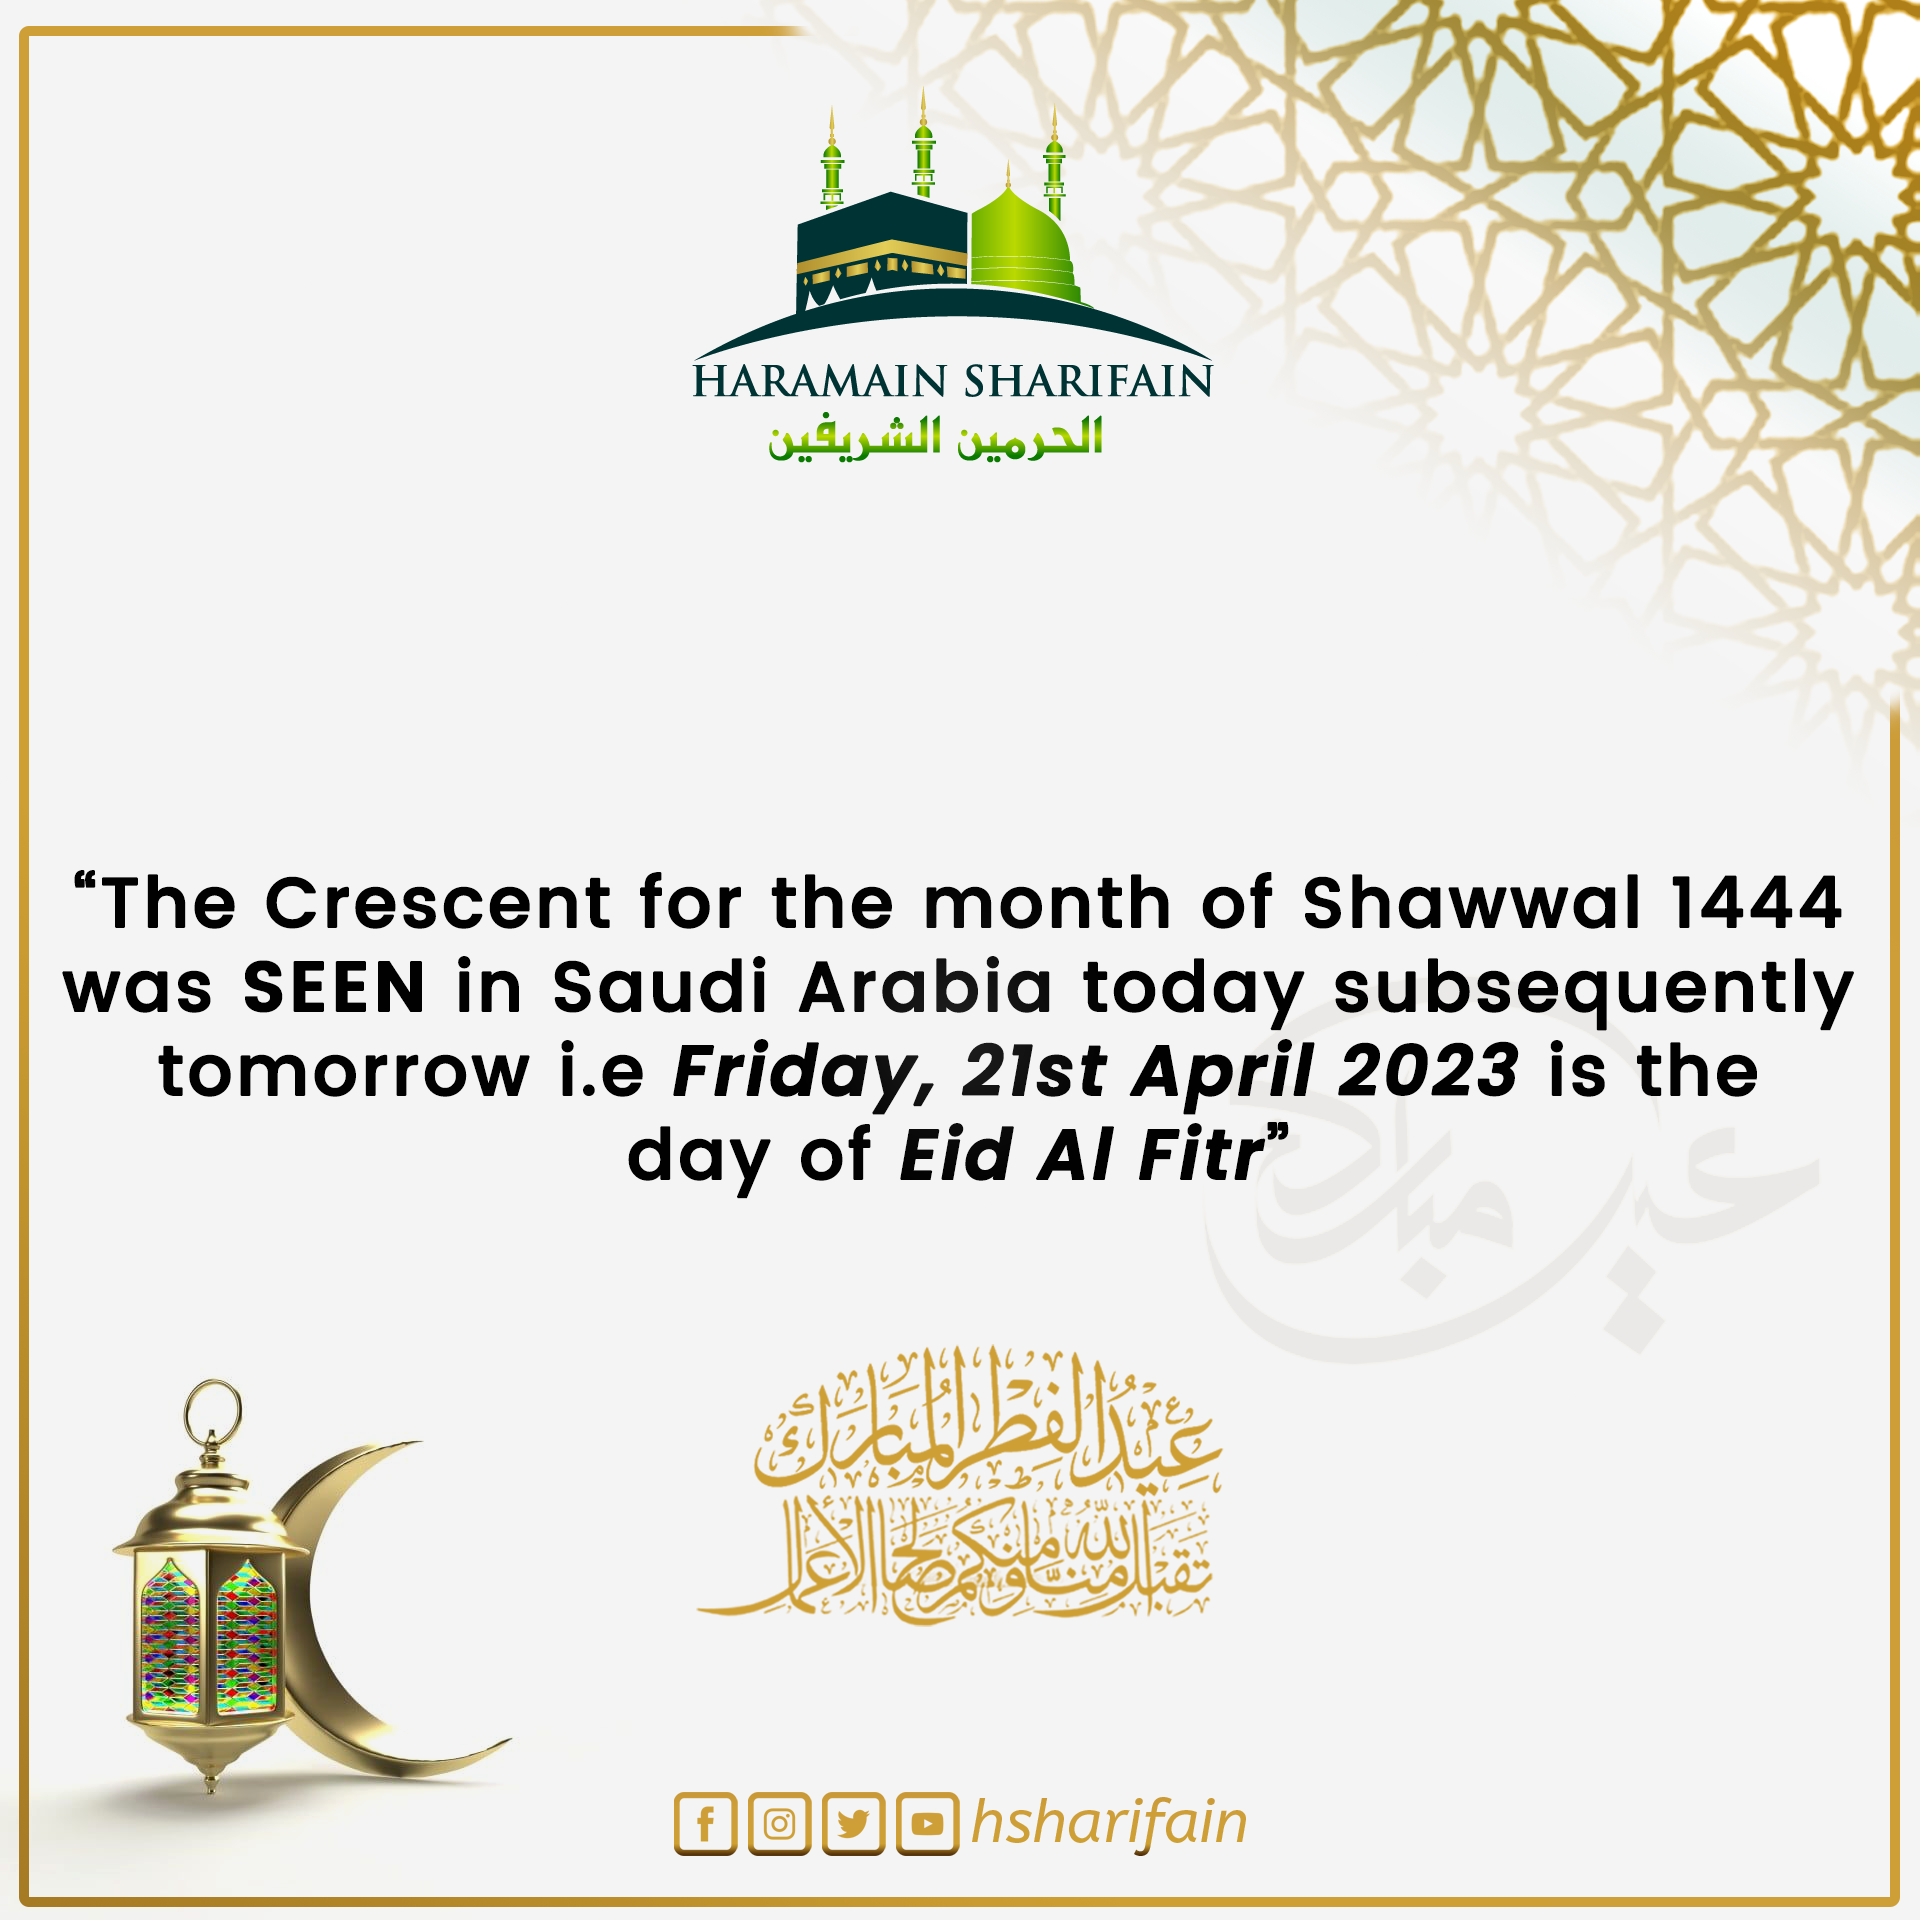 You are currently viewing Shawwal 1444 Crescent sighted, Eid Al Fitr on Friday